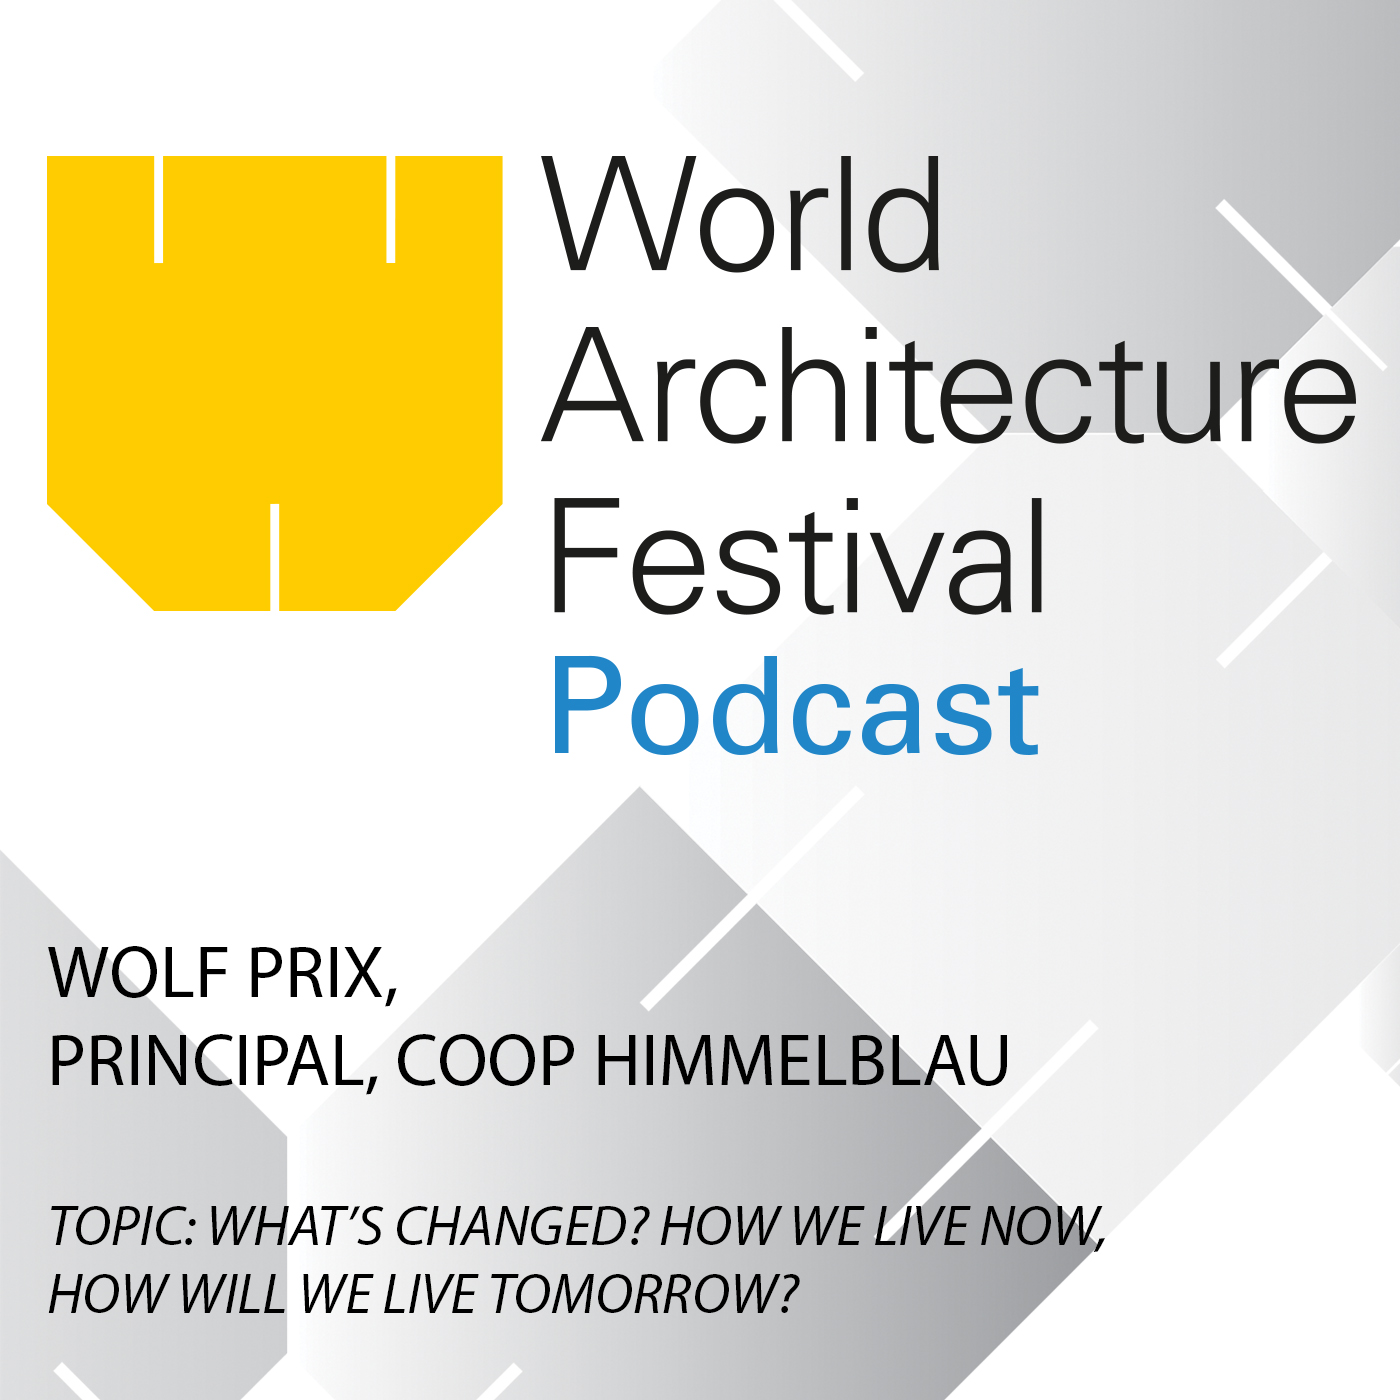 WAF Podcast: Wolf Prix and Sir Peter Cook